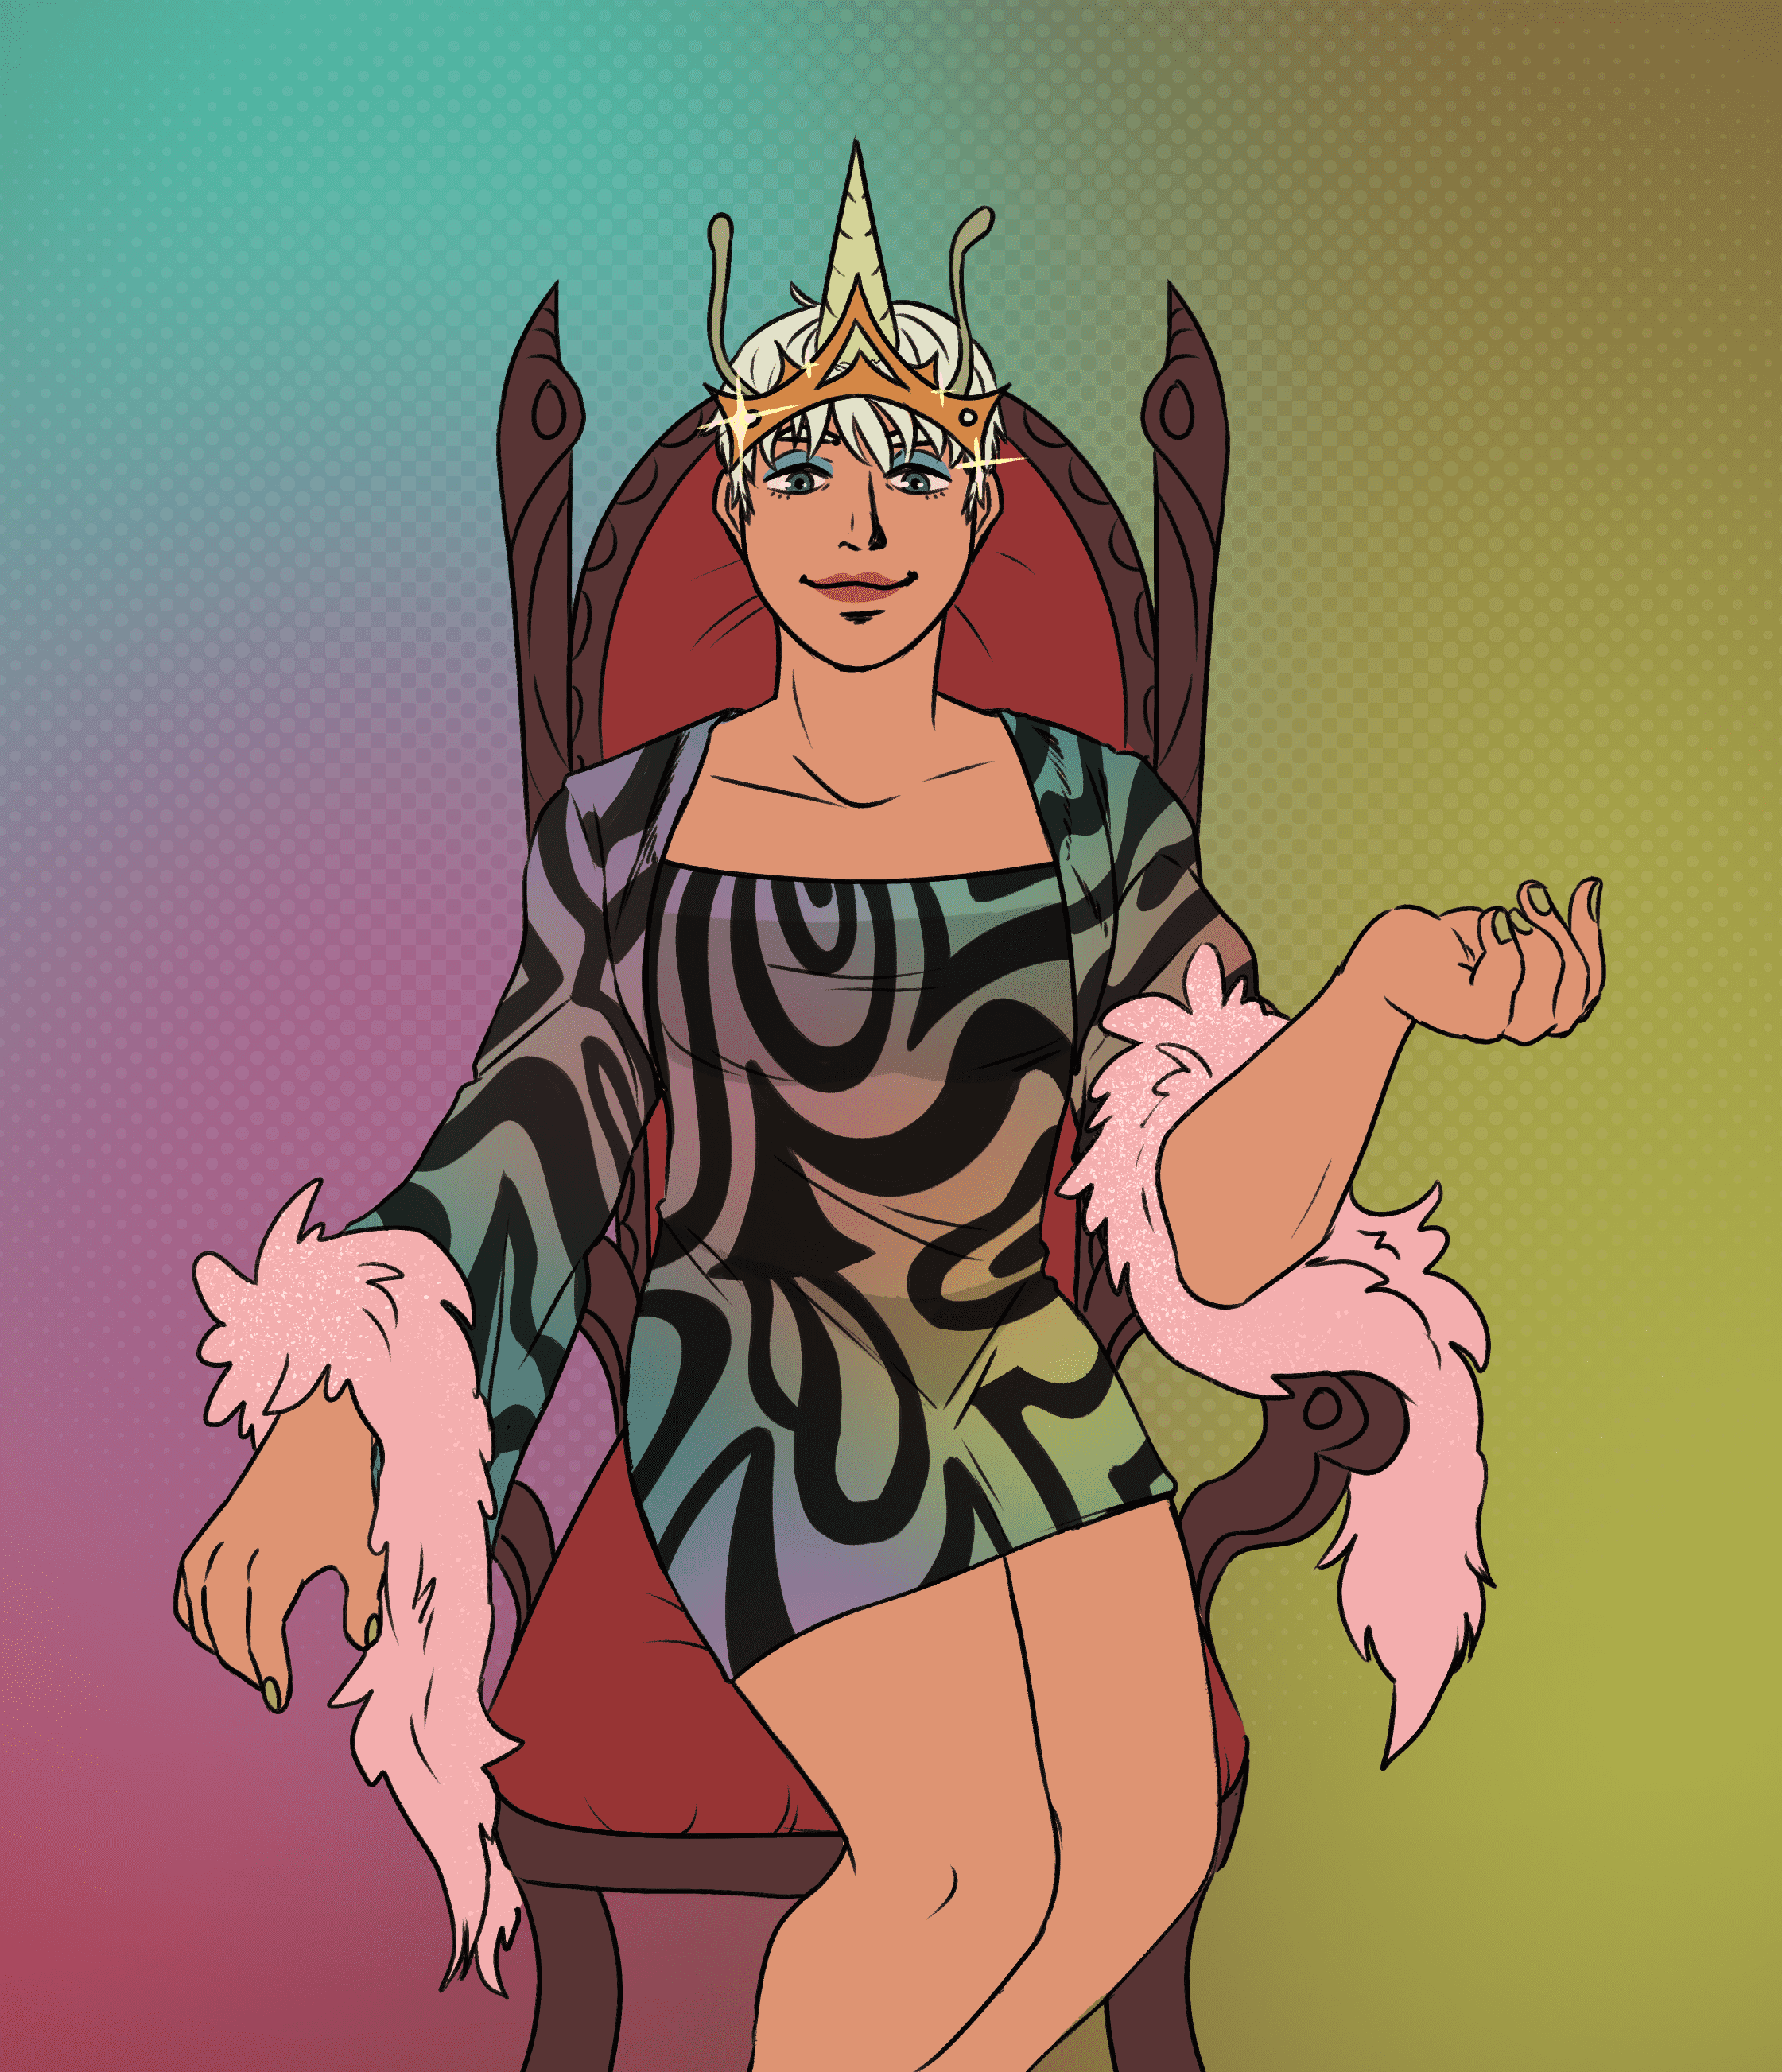 teresa wearing a psychedelic see-through dress and a crown in a beautiful throne, she has antennae and unicorn horn